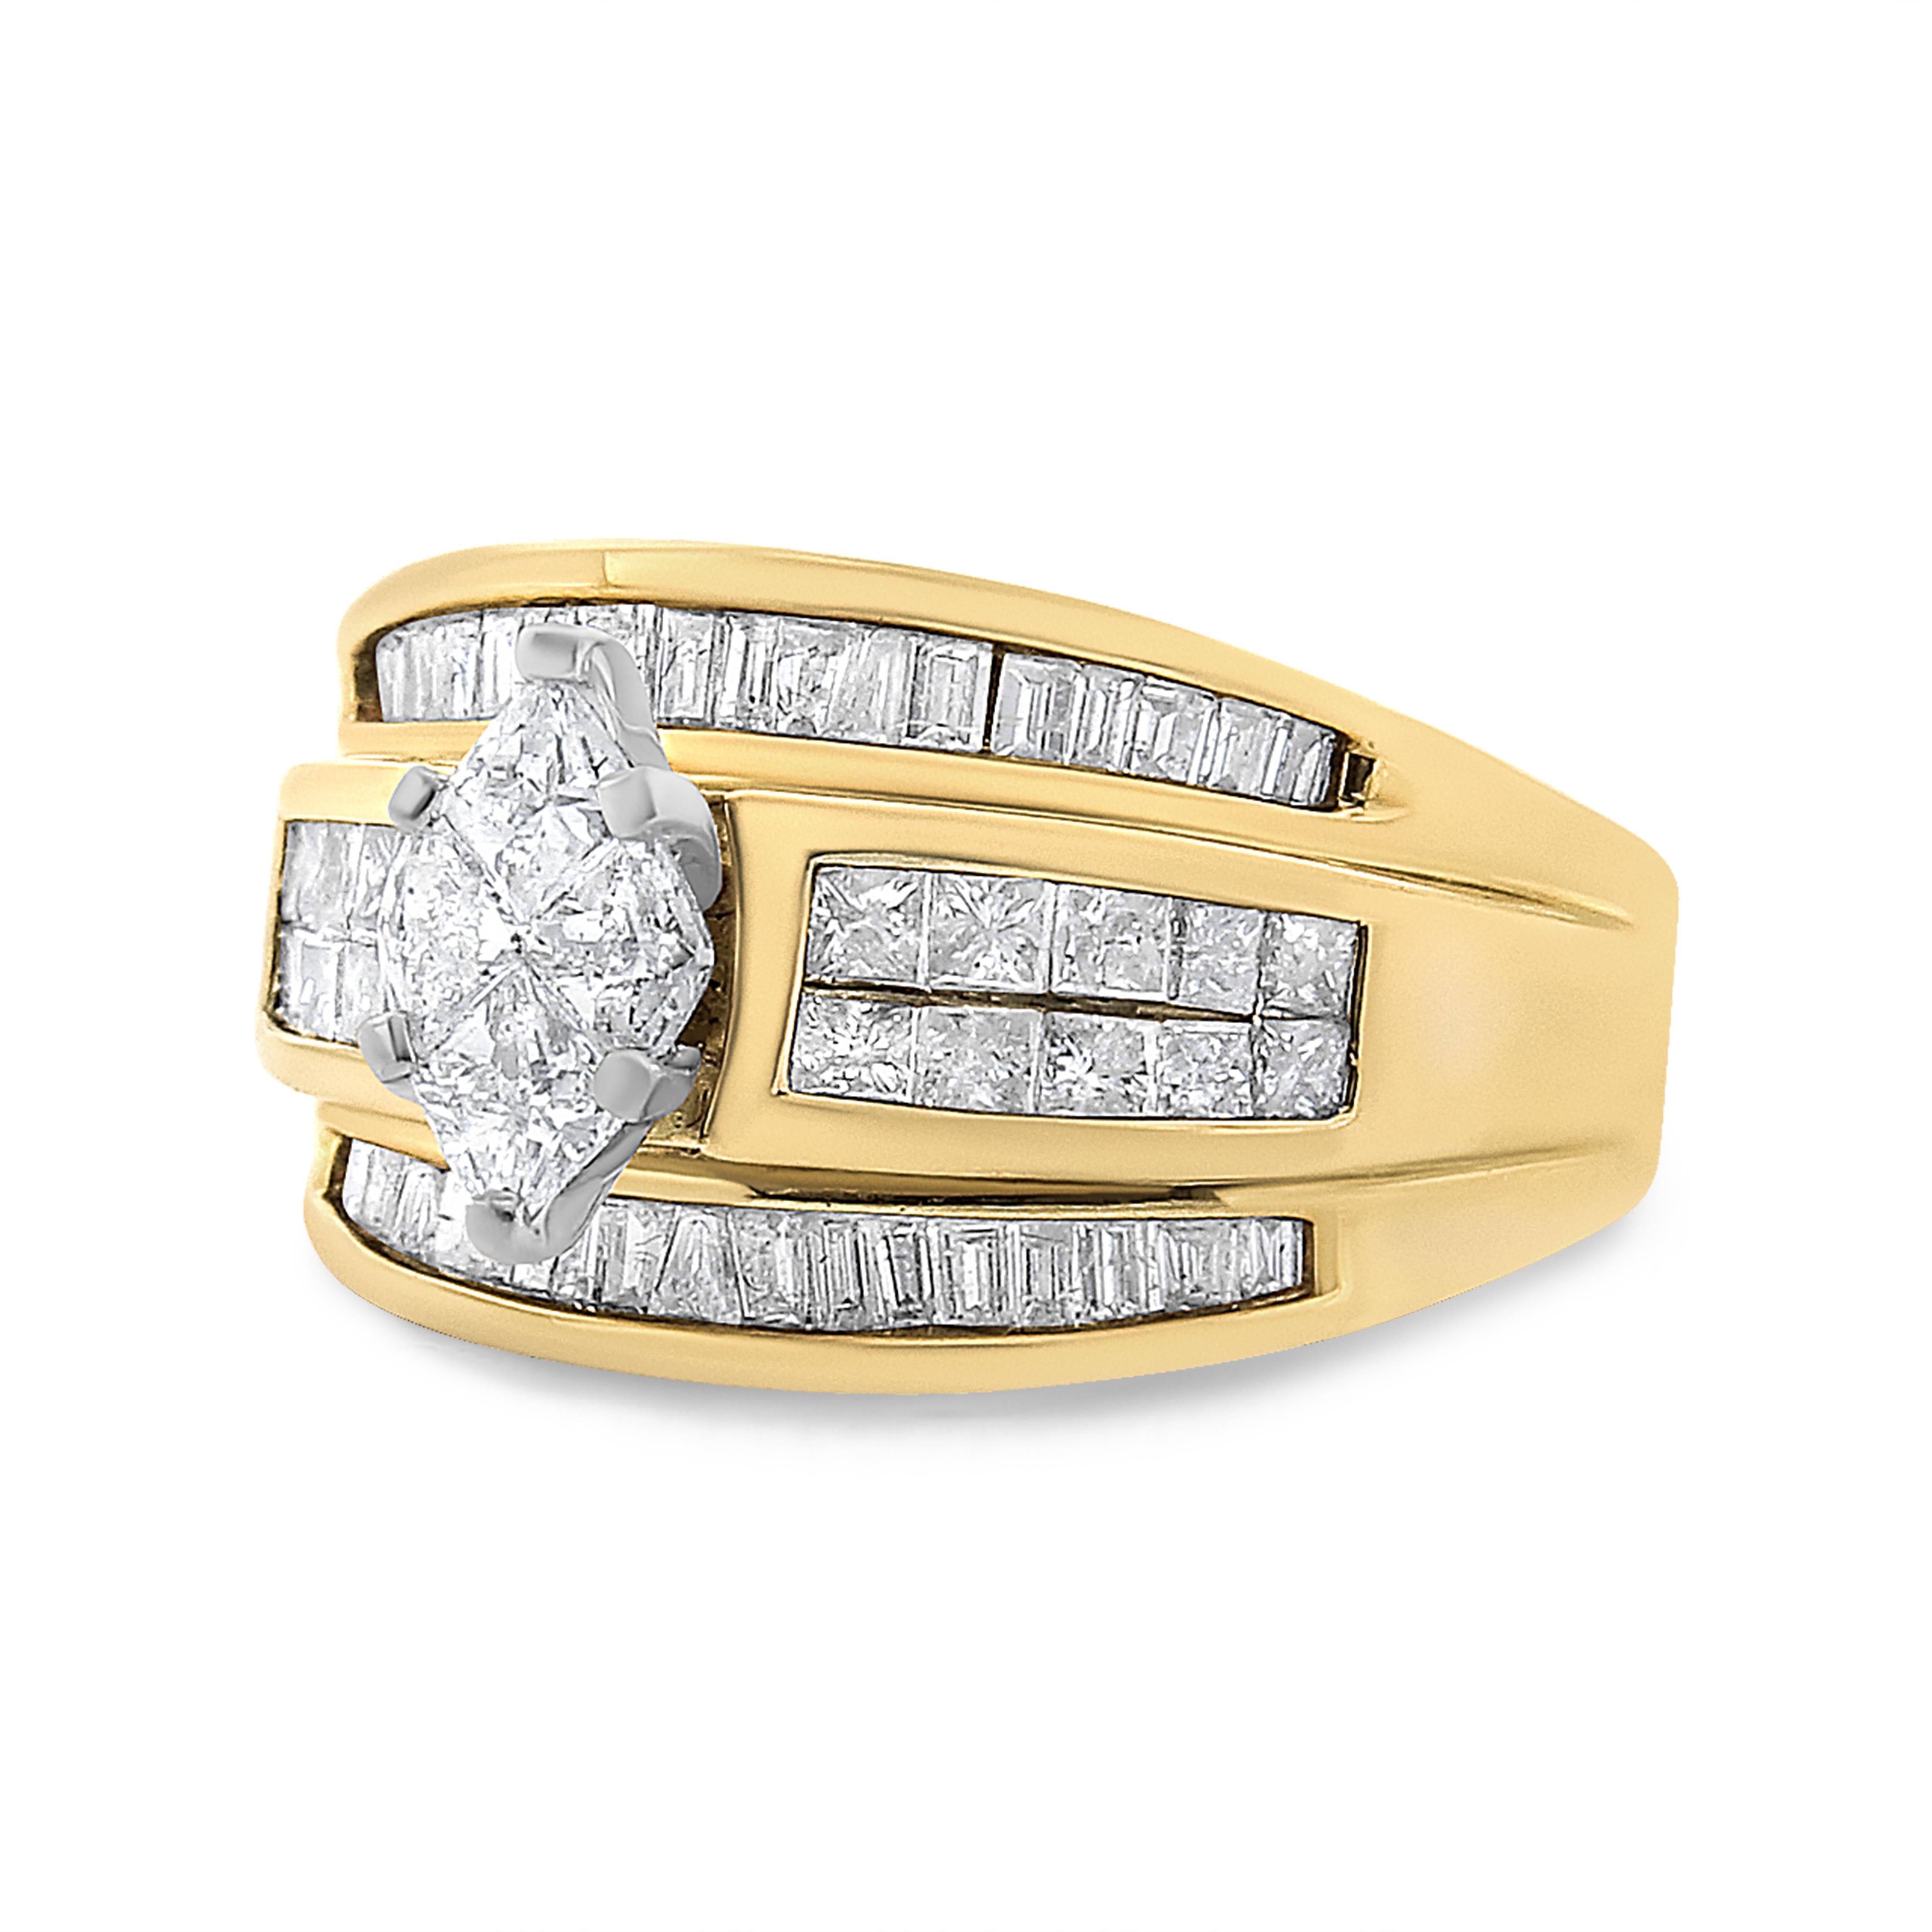 Bold and striking, this 14k yellow gold ring is expertly set with a stunning 1 1/2 cttw of natural diamonds. 4 pie-cut diamonds sparkle at the center of this ring. Princess and baguette-cut diamonds are embellished into the 14k gold band in a